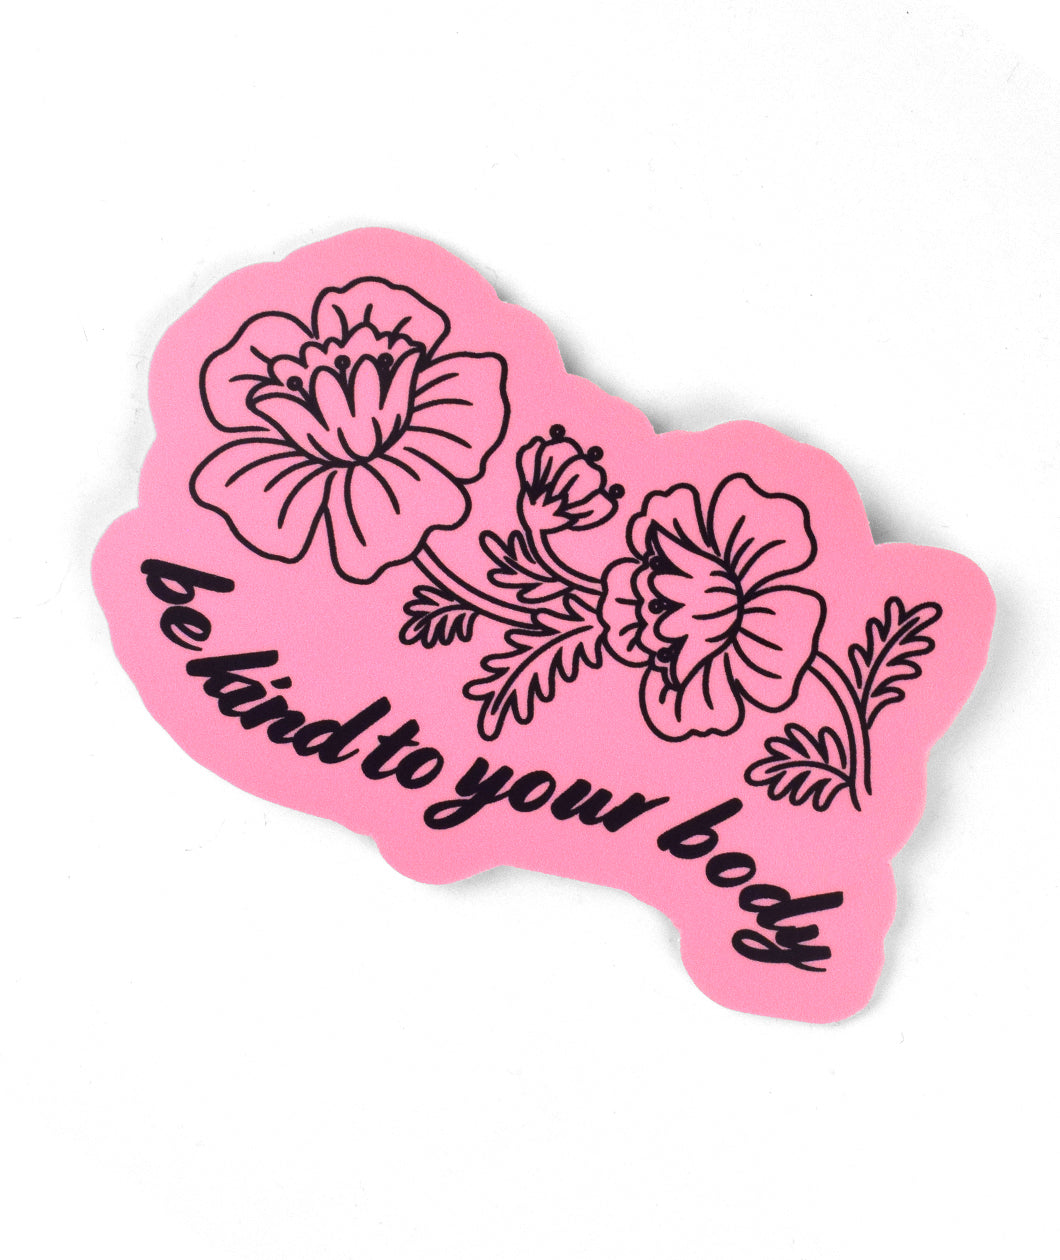 A pink base sticker with a black outline of flowers with a stem attached and some leaves. Underneath, “be kind to your body” is in black cursive font below in a wavy style - from Sierra Schultzzie